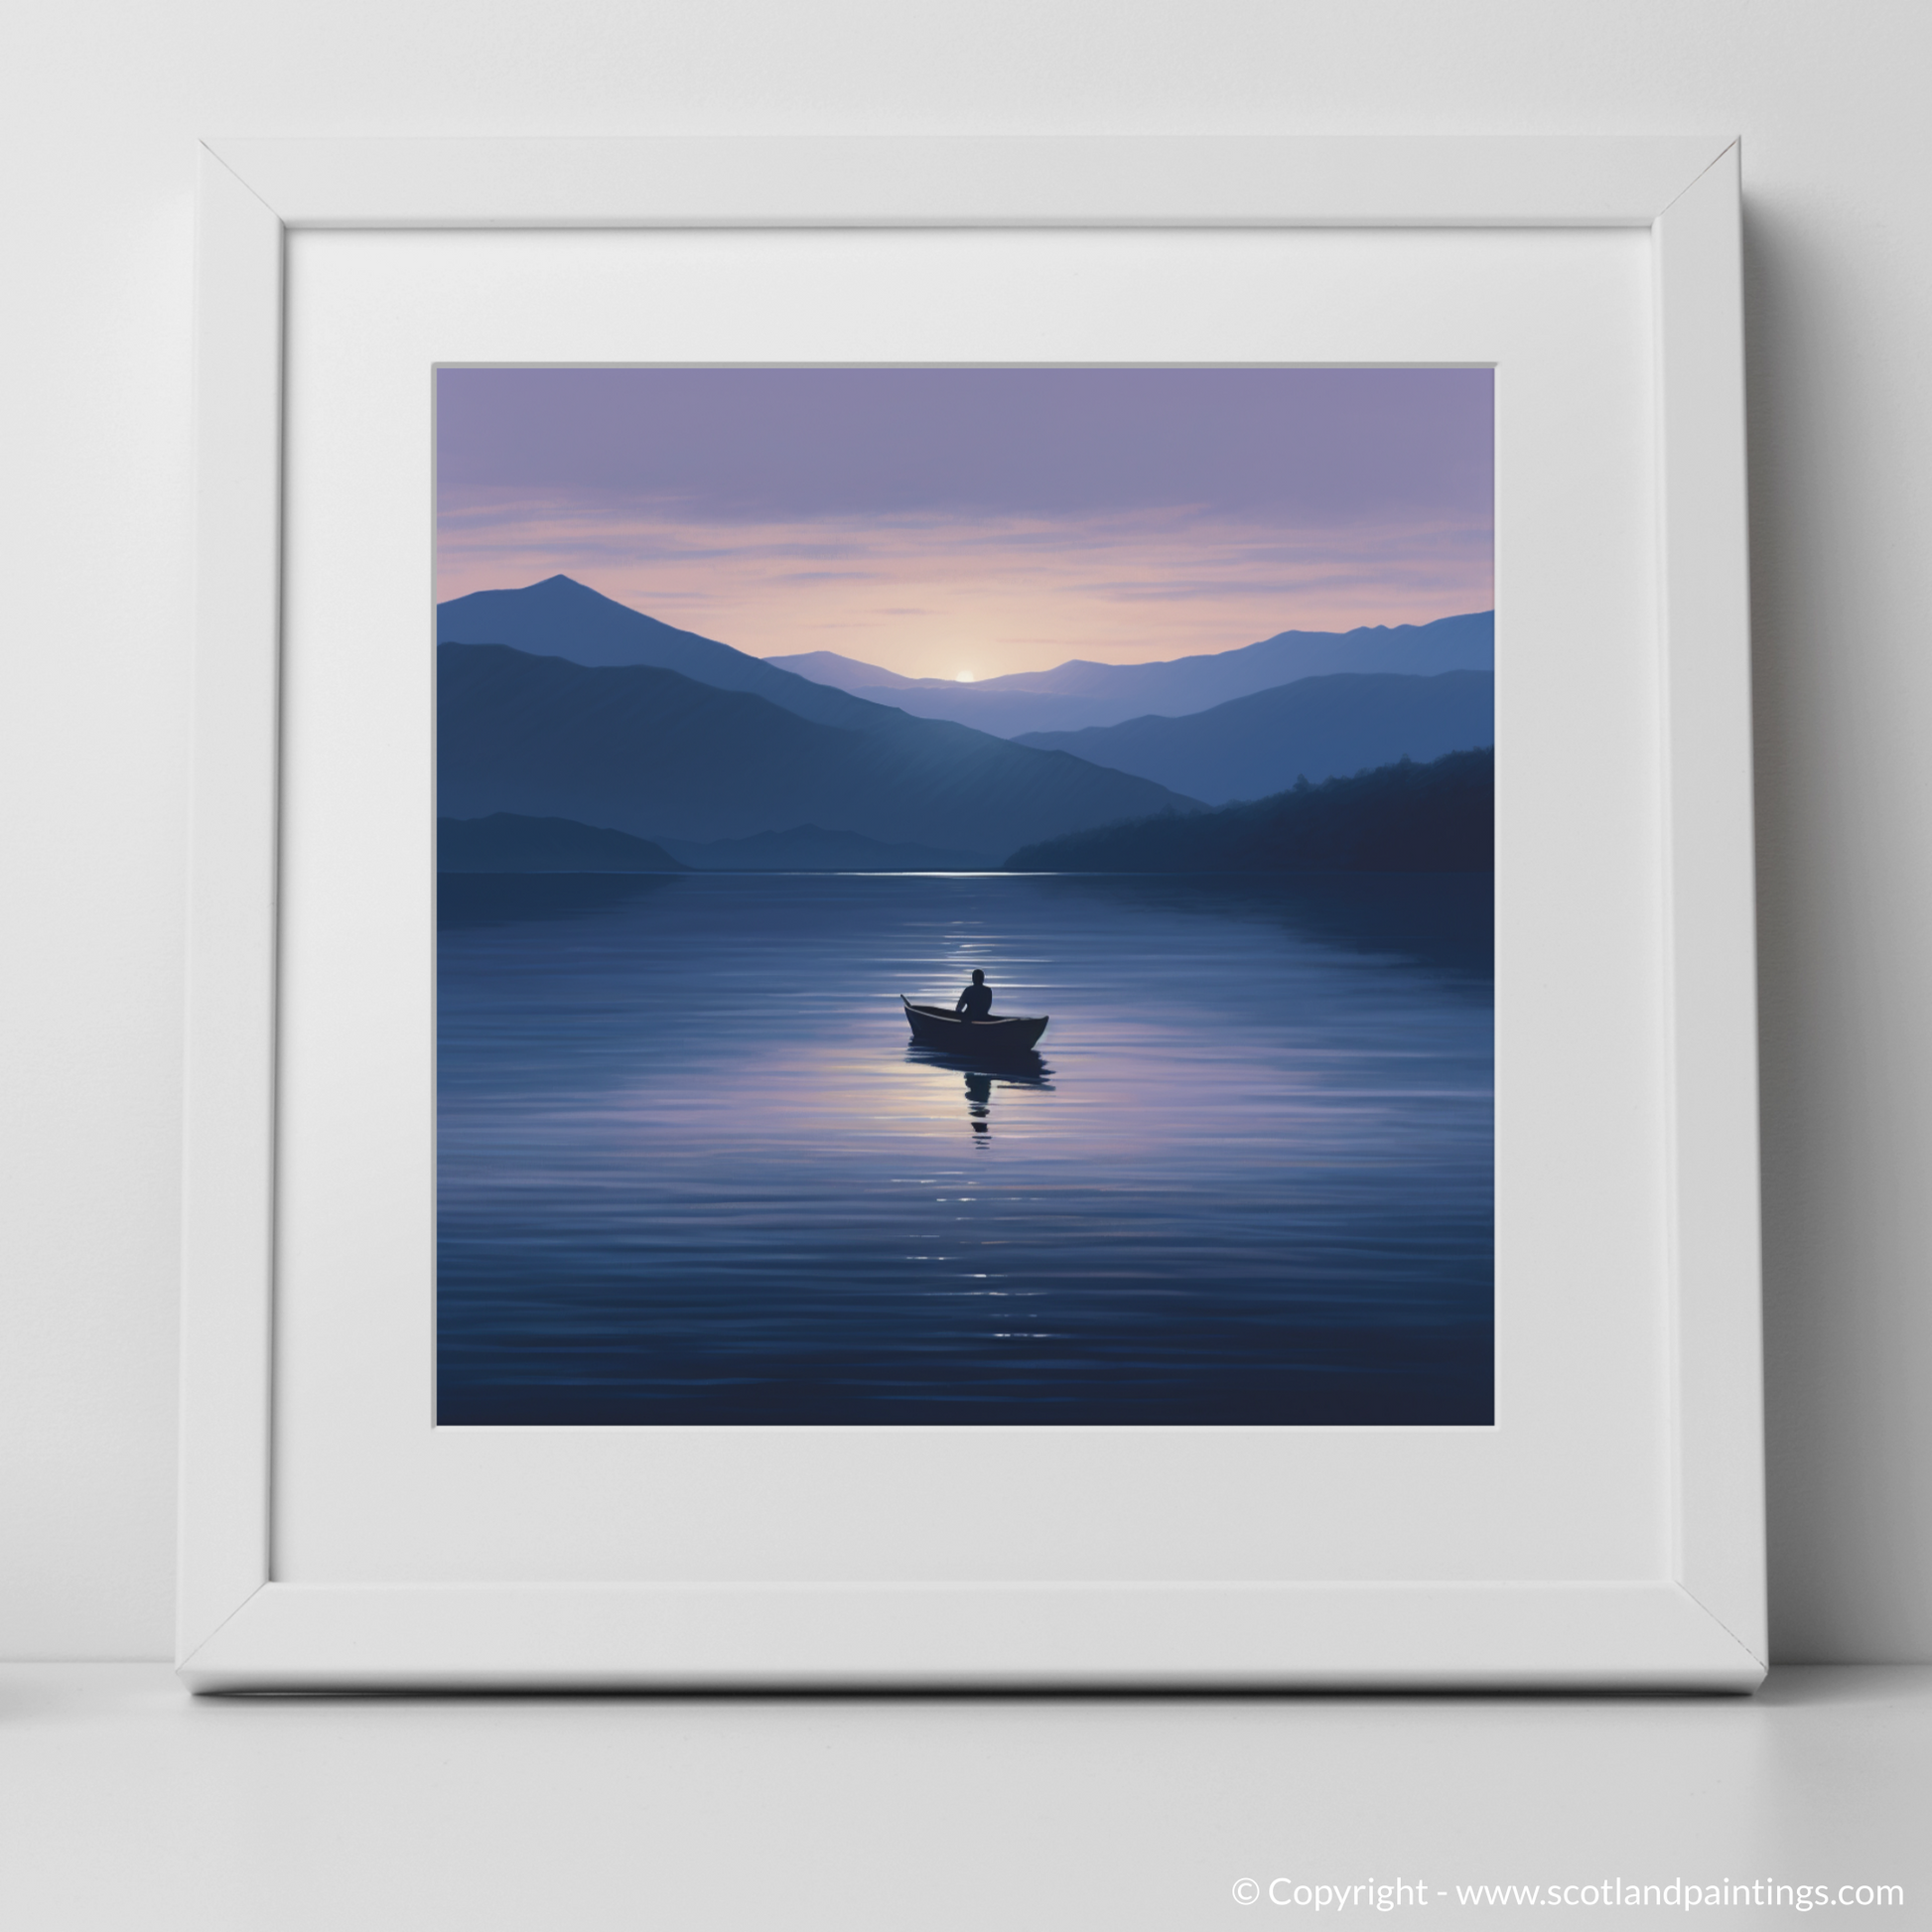 Art Print of Lone rowboat on Loch Lomond at dusk with a white frame